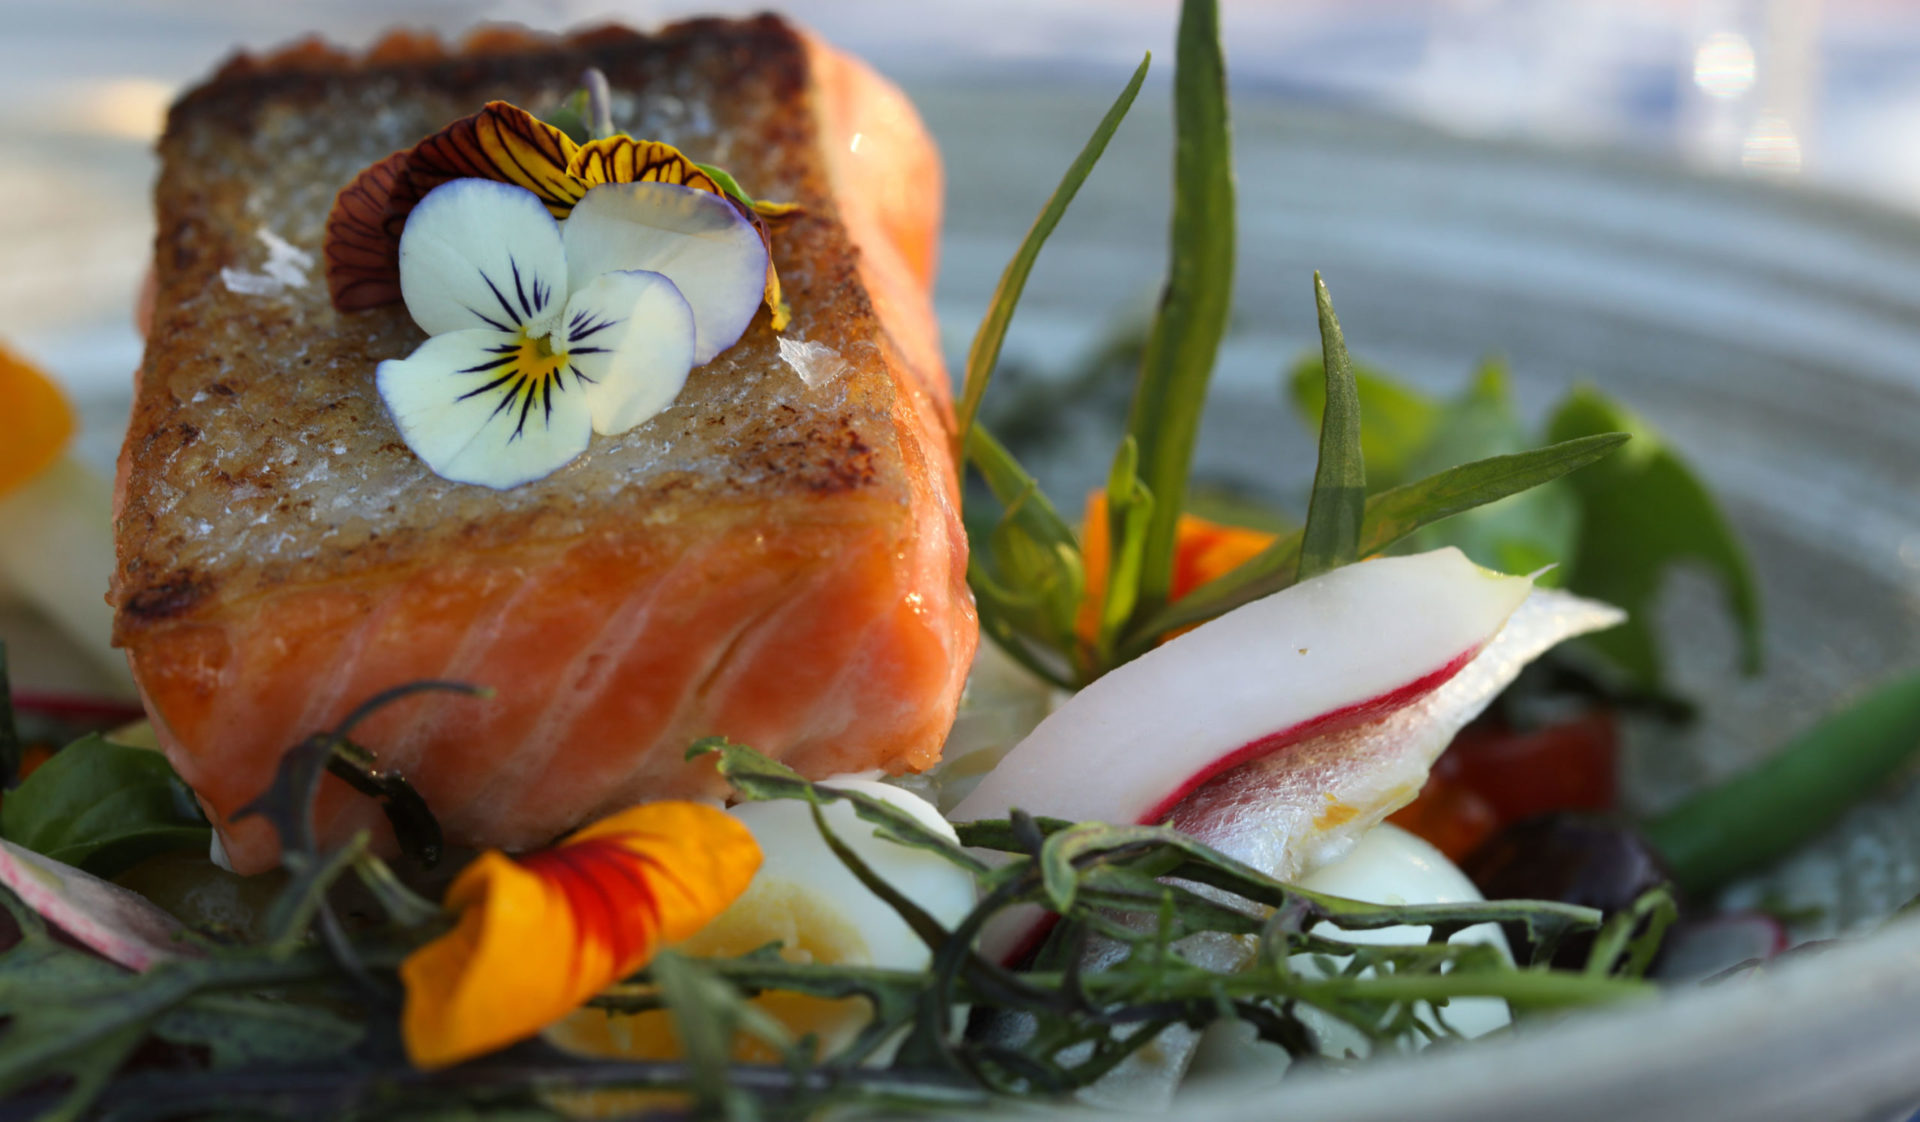 Beautifully plated salmon and vegetables